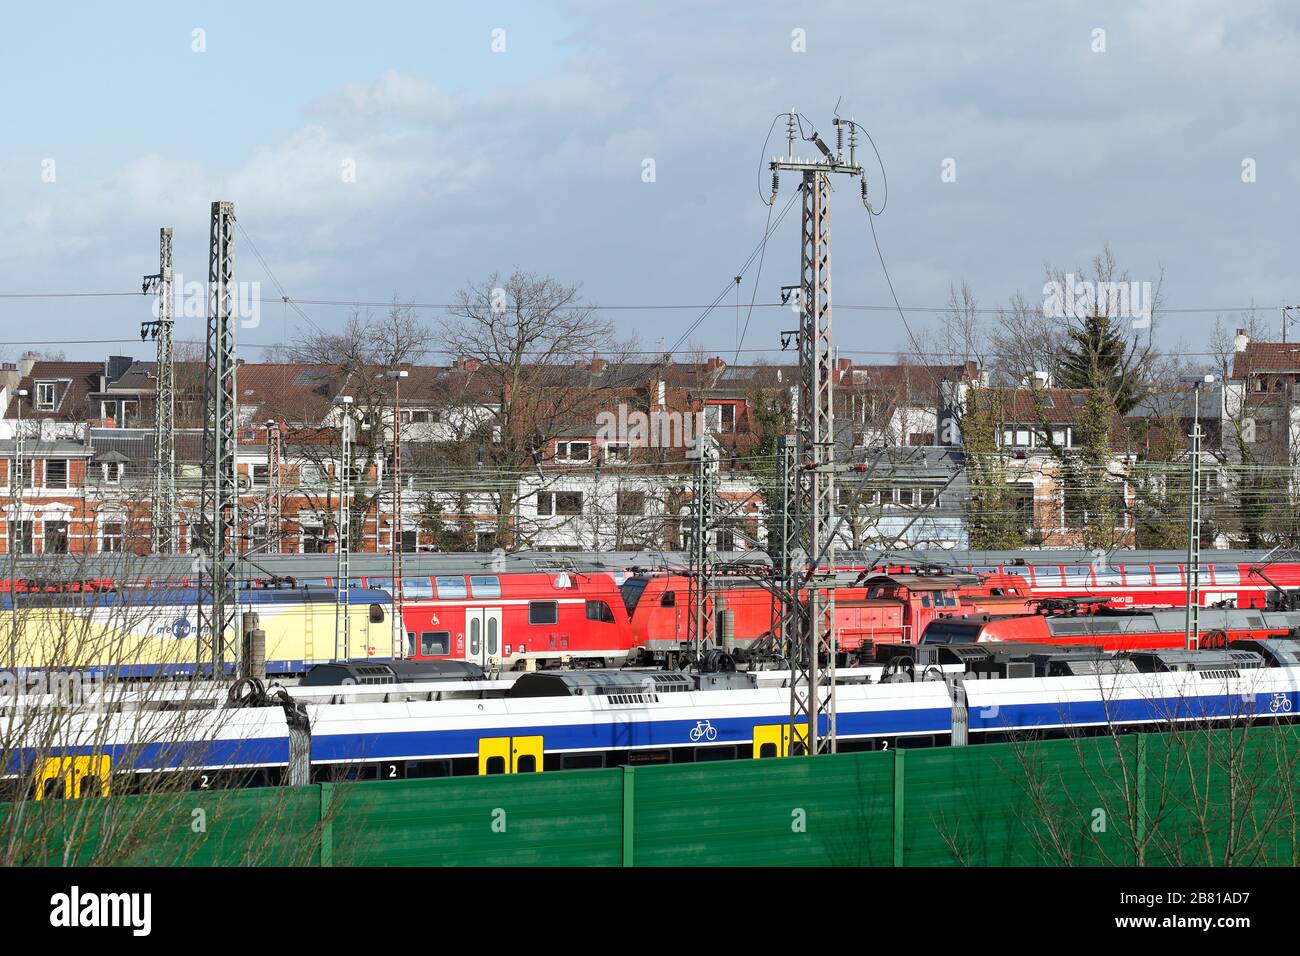 Local trains, railway systems, Green Noise Barrier, Bremen, Germany Stock Photo